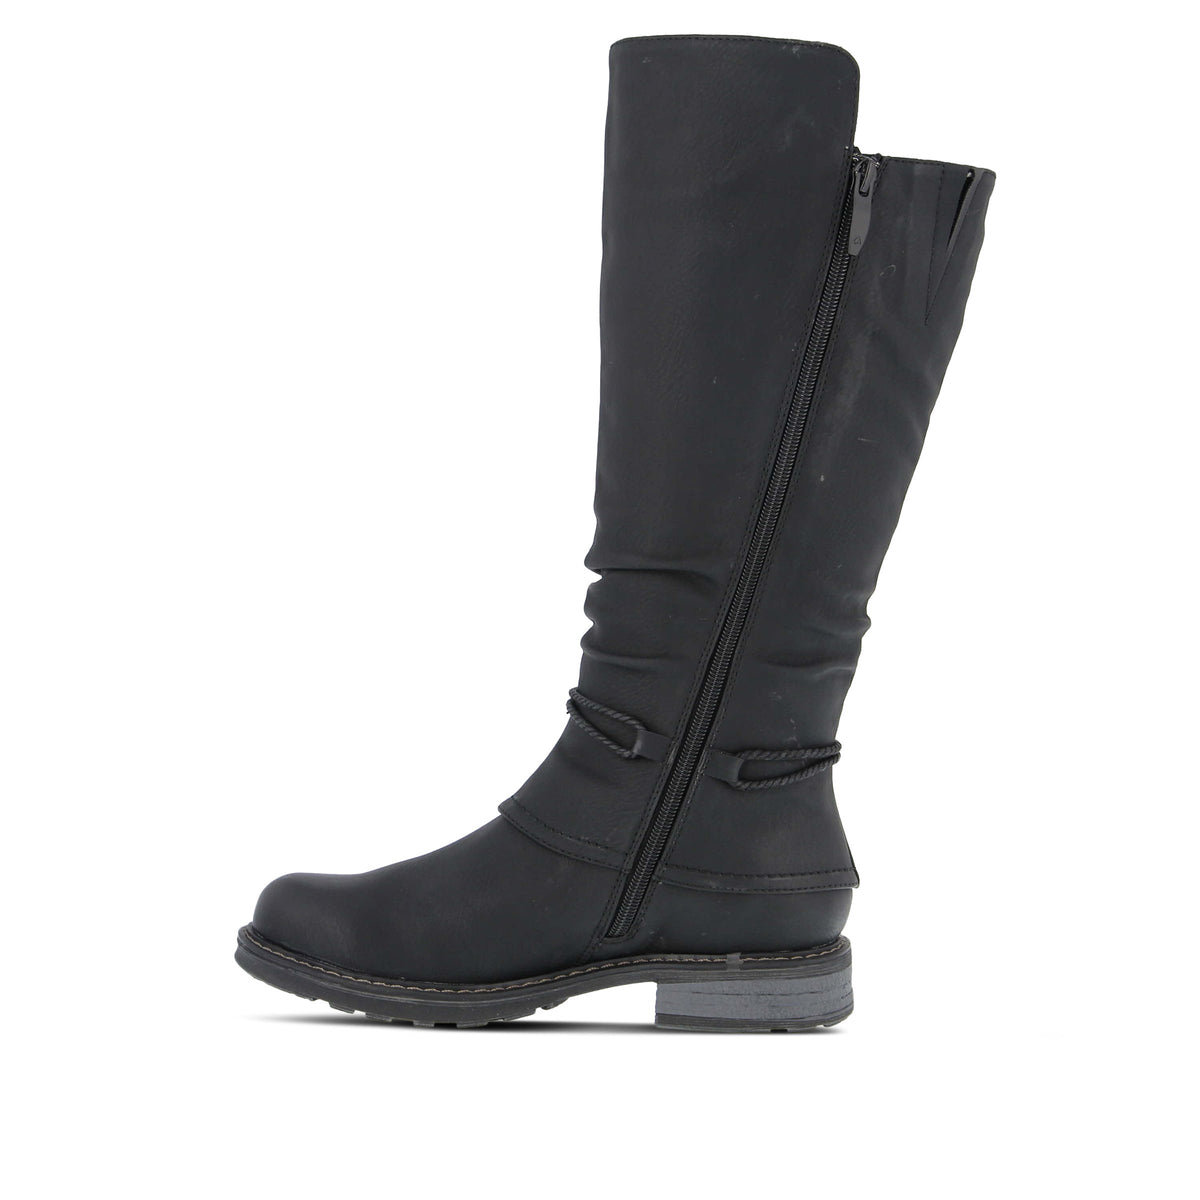 MUSEROPETT BOOT by Patrizia#N#– Spring Step Shoes